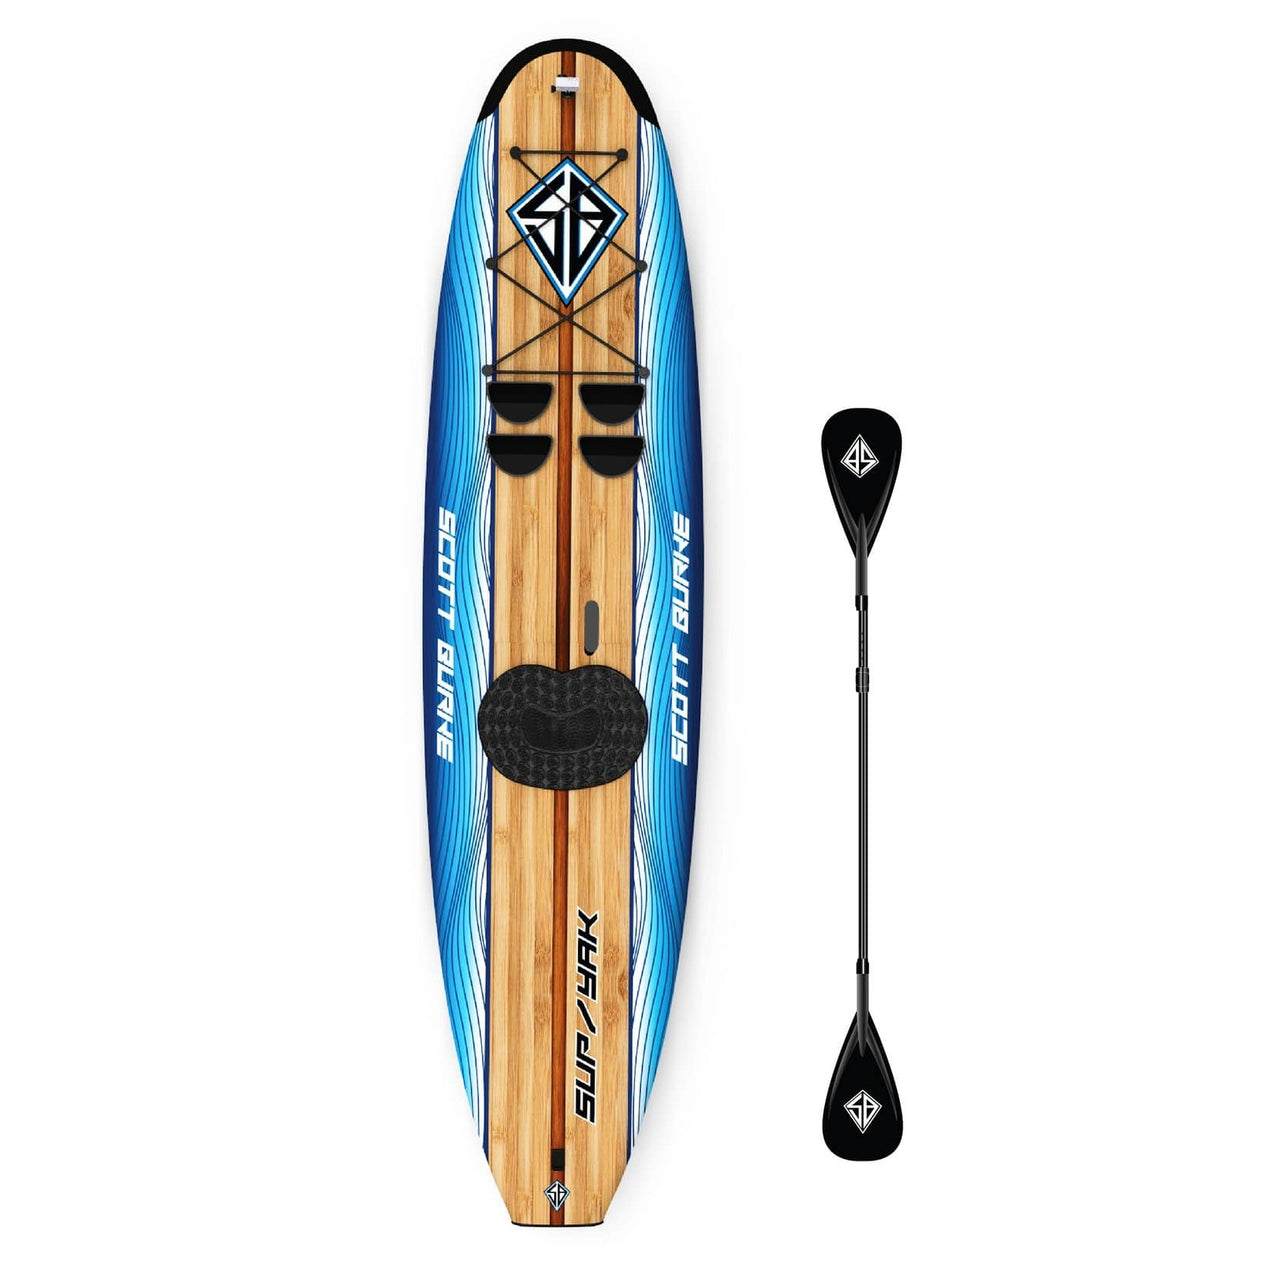 Scott Burke 10'6" SUP/YAK Crossover Stand Up Paddle Board